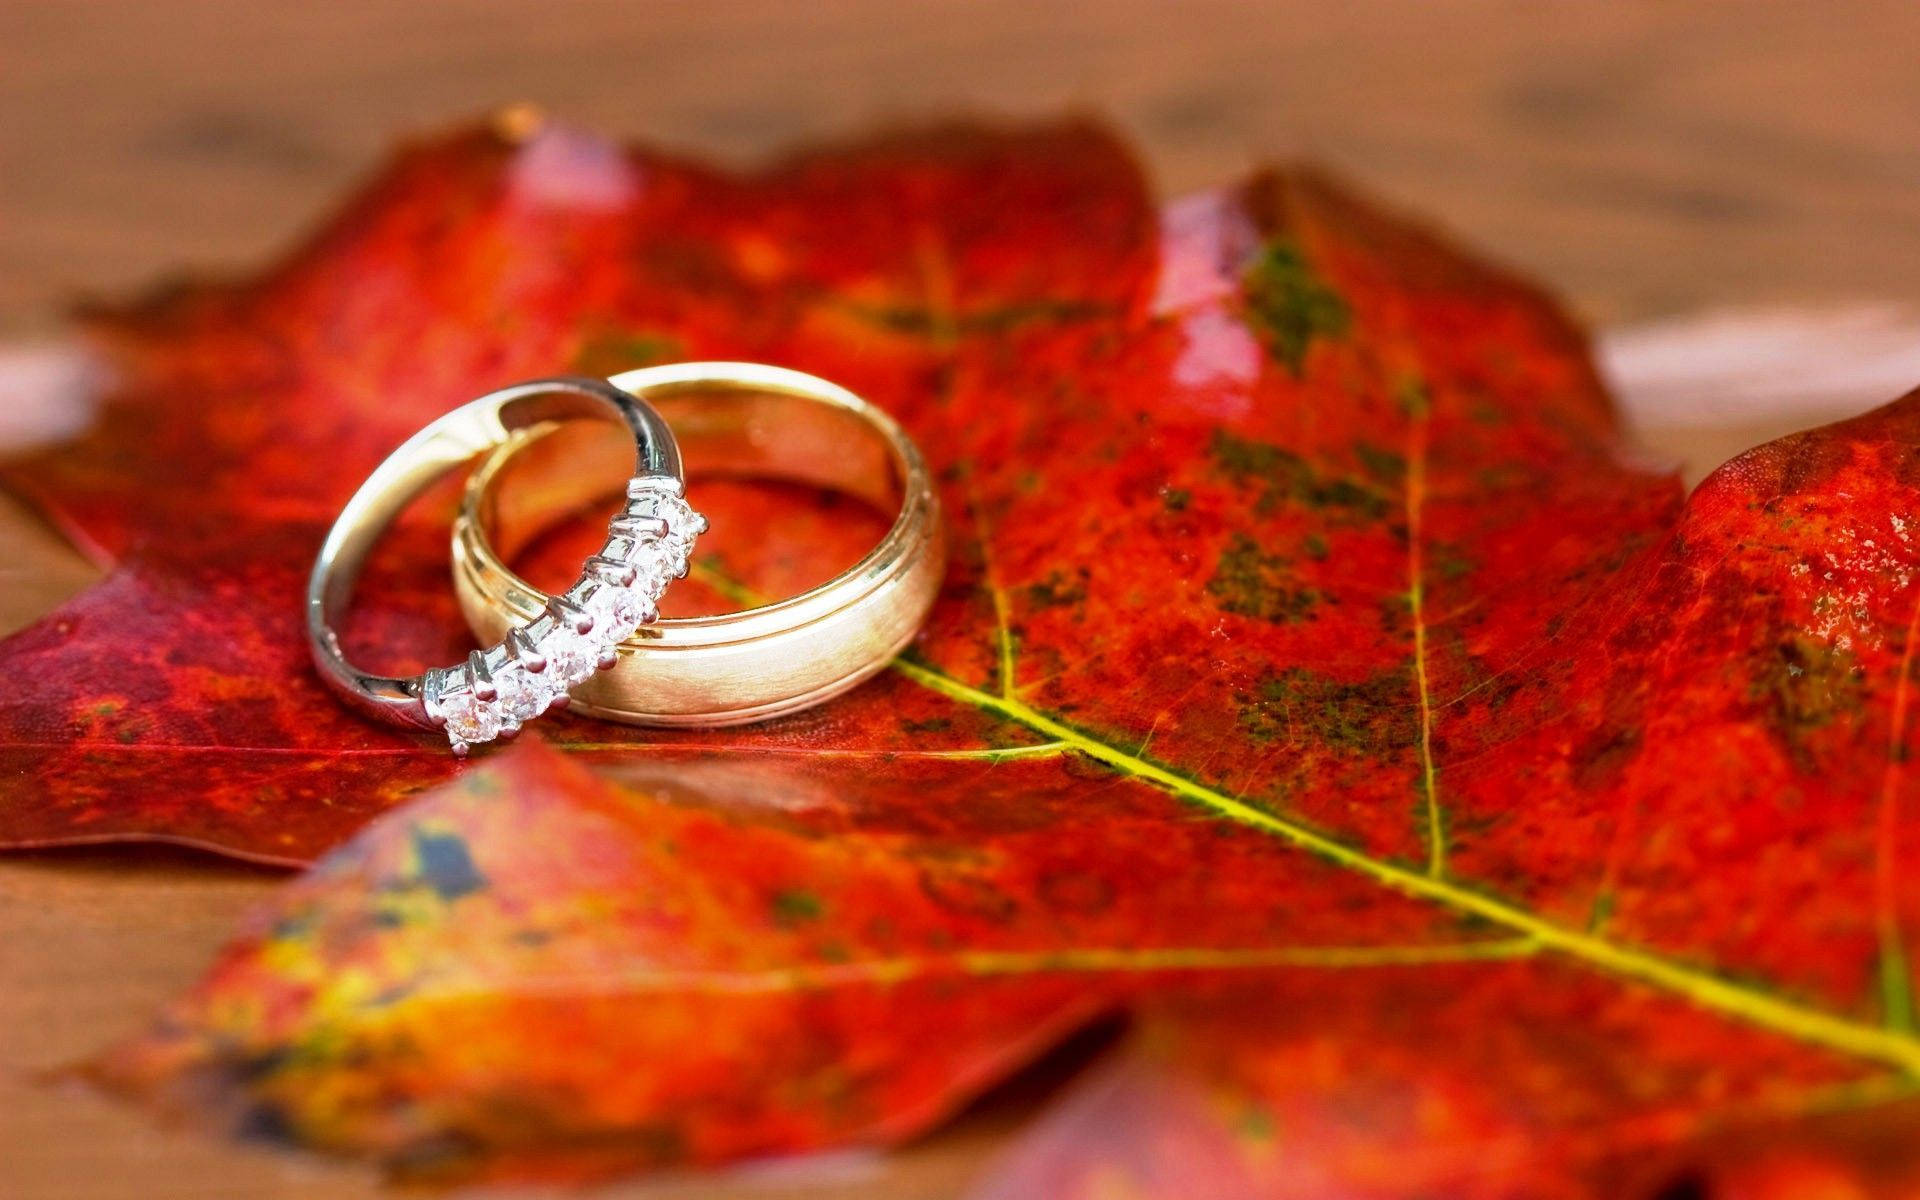 Gold Wedding Rings On Red Leaf